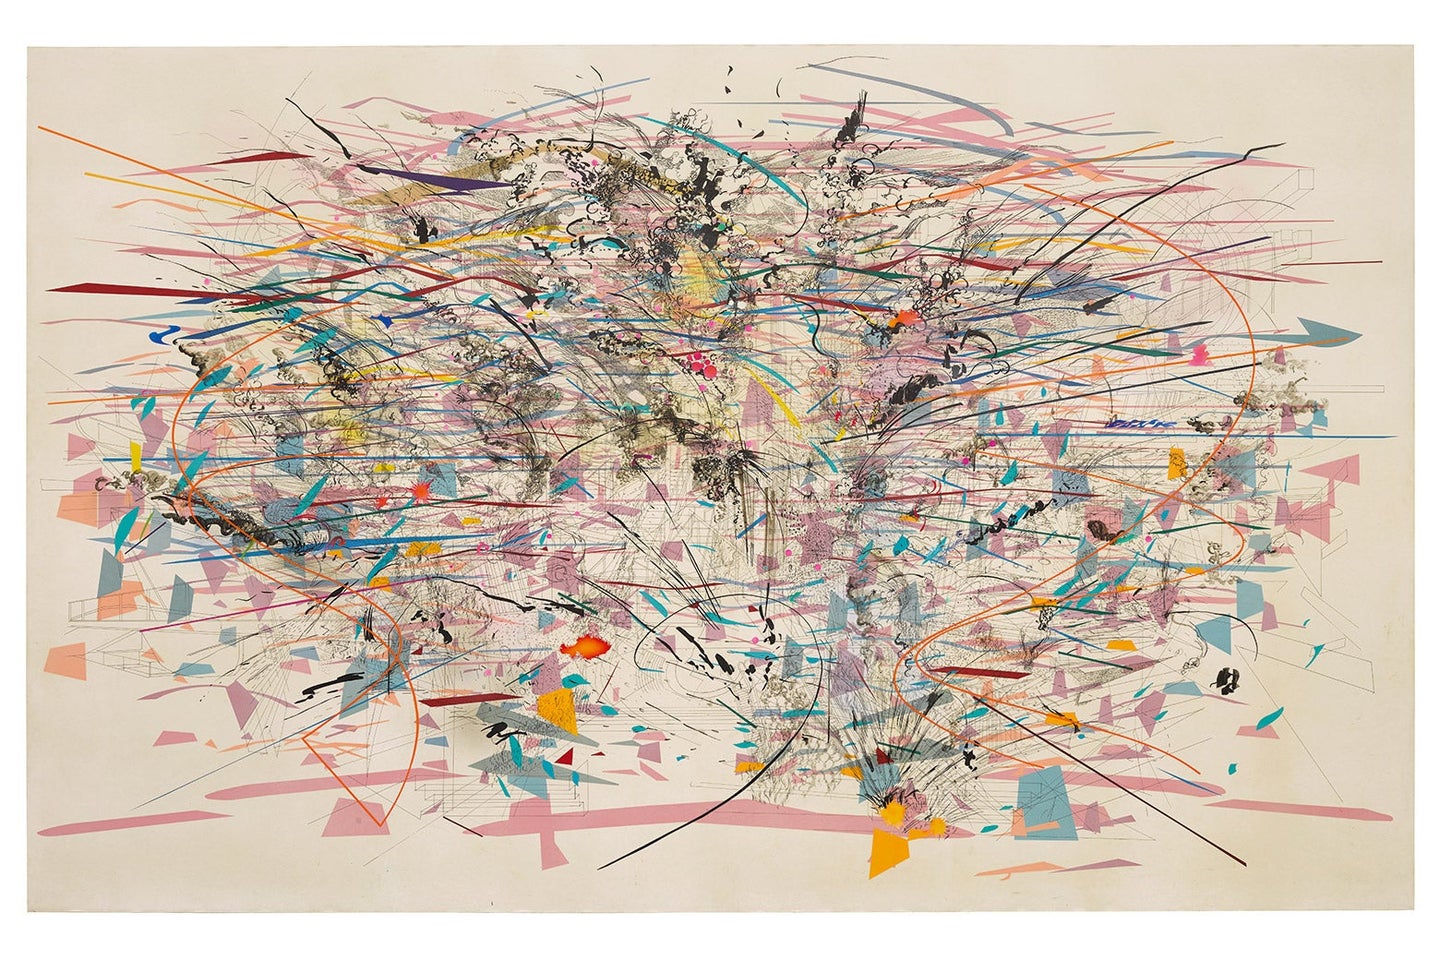 Julie Mehretu is the most exciting visual artist of our time.